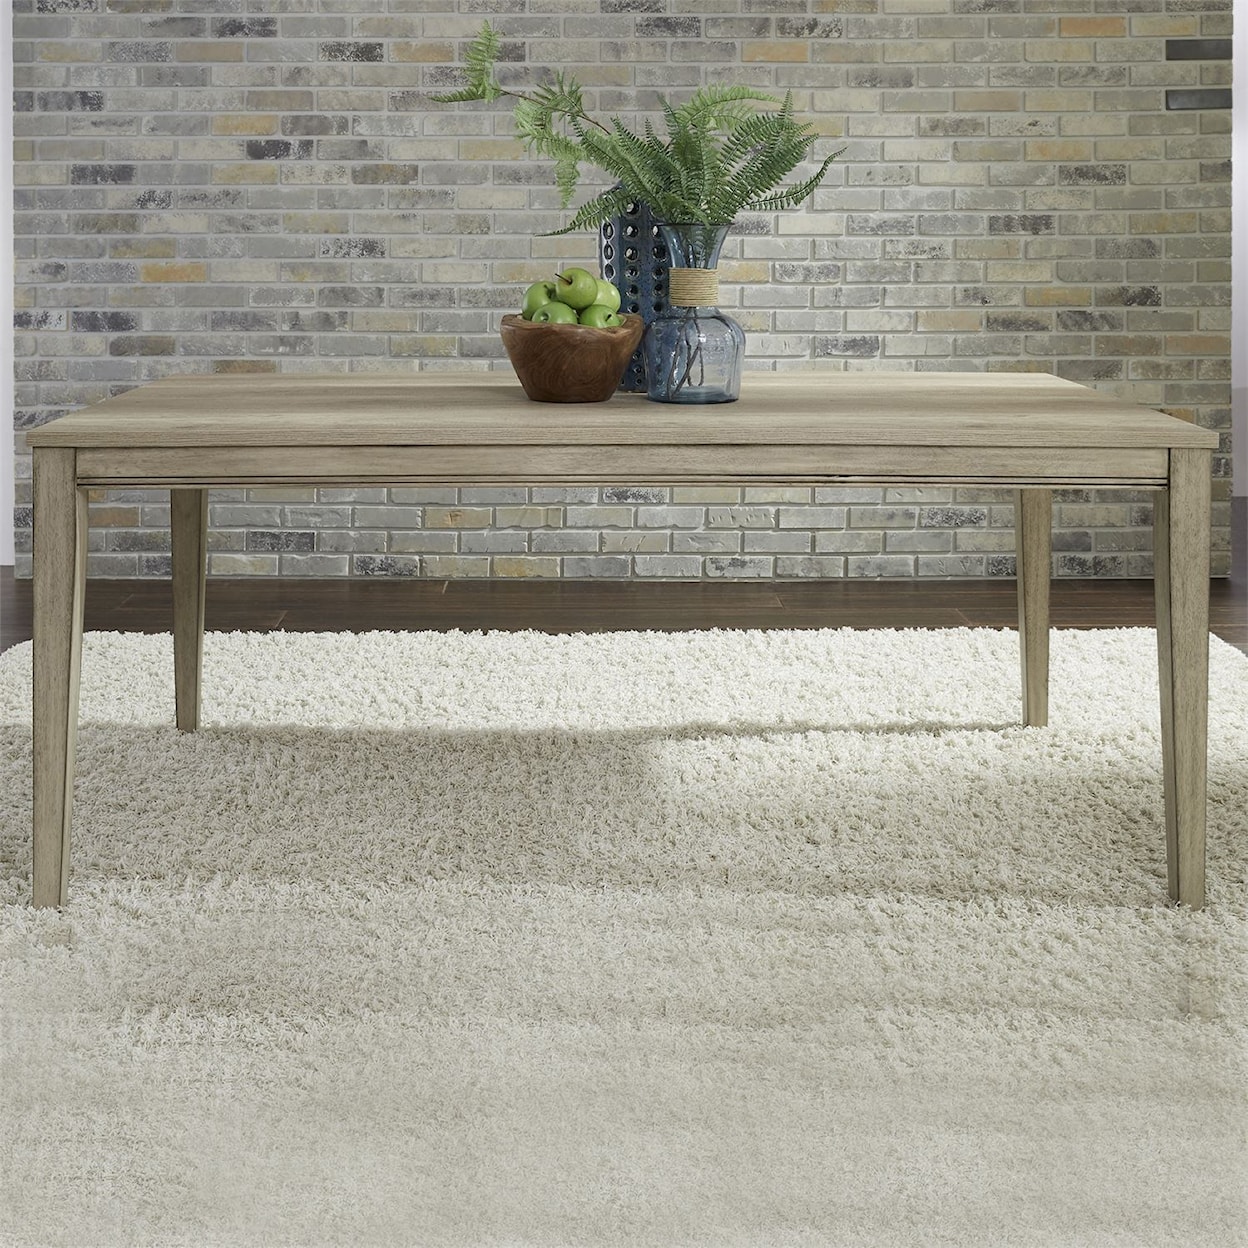 Libby Sun Valley Dining Table